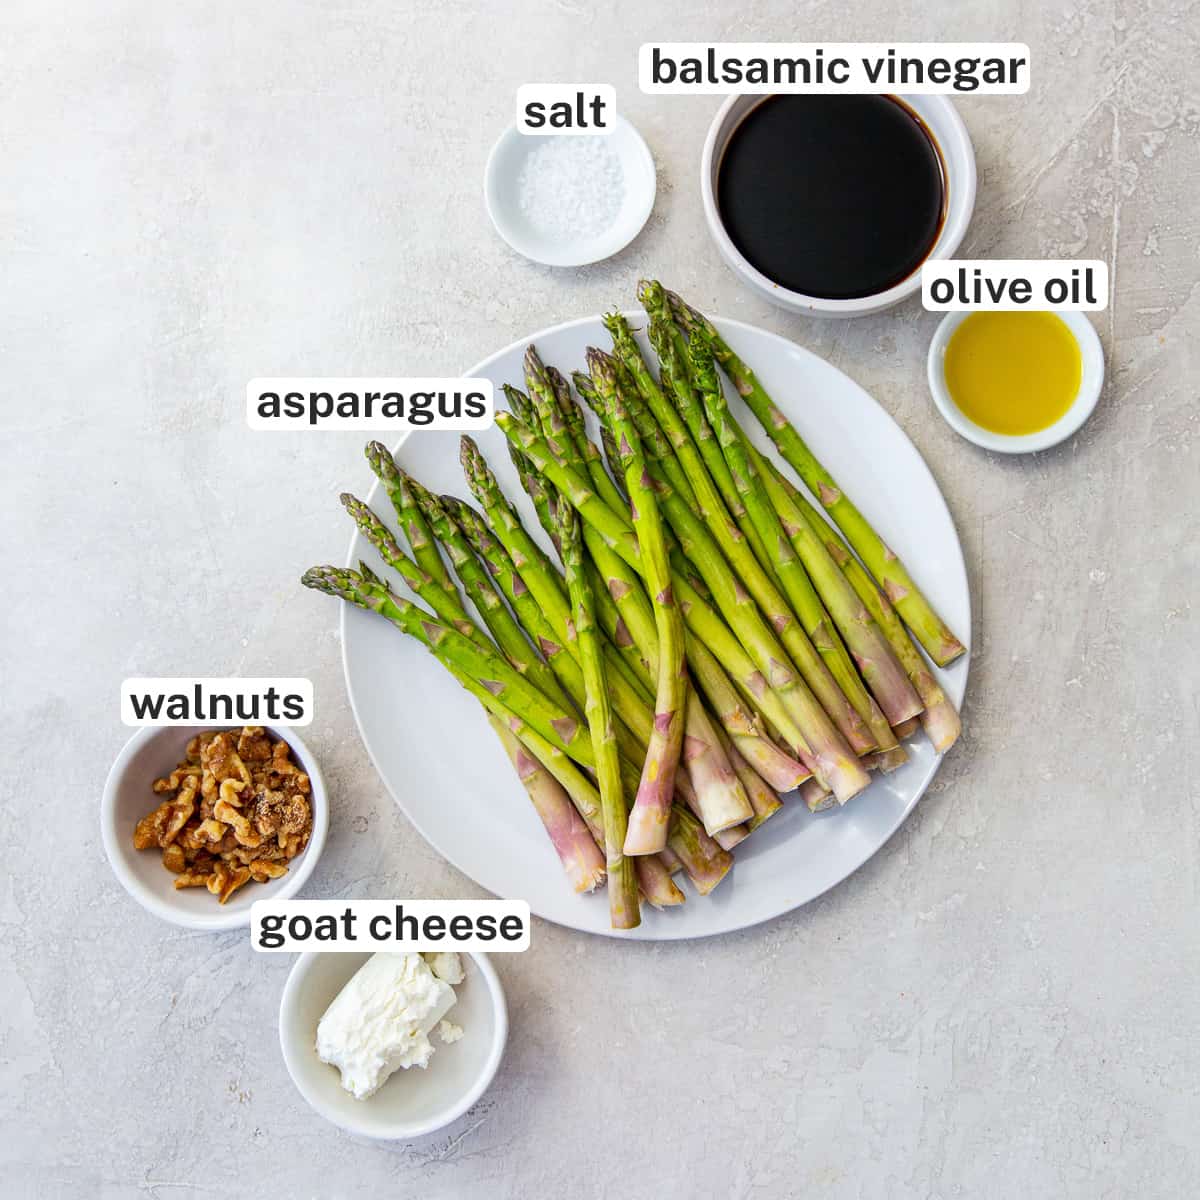 Asparagus, balsamic vinegar, goat cheese and other ingredients with text.